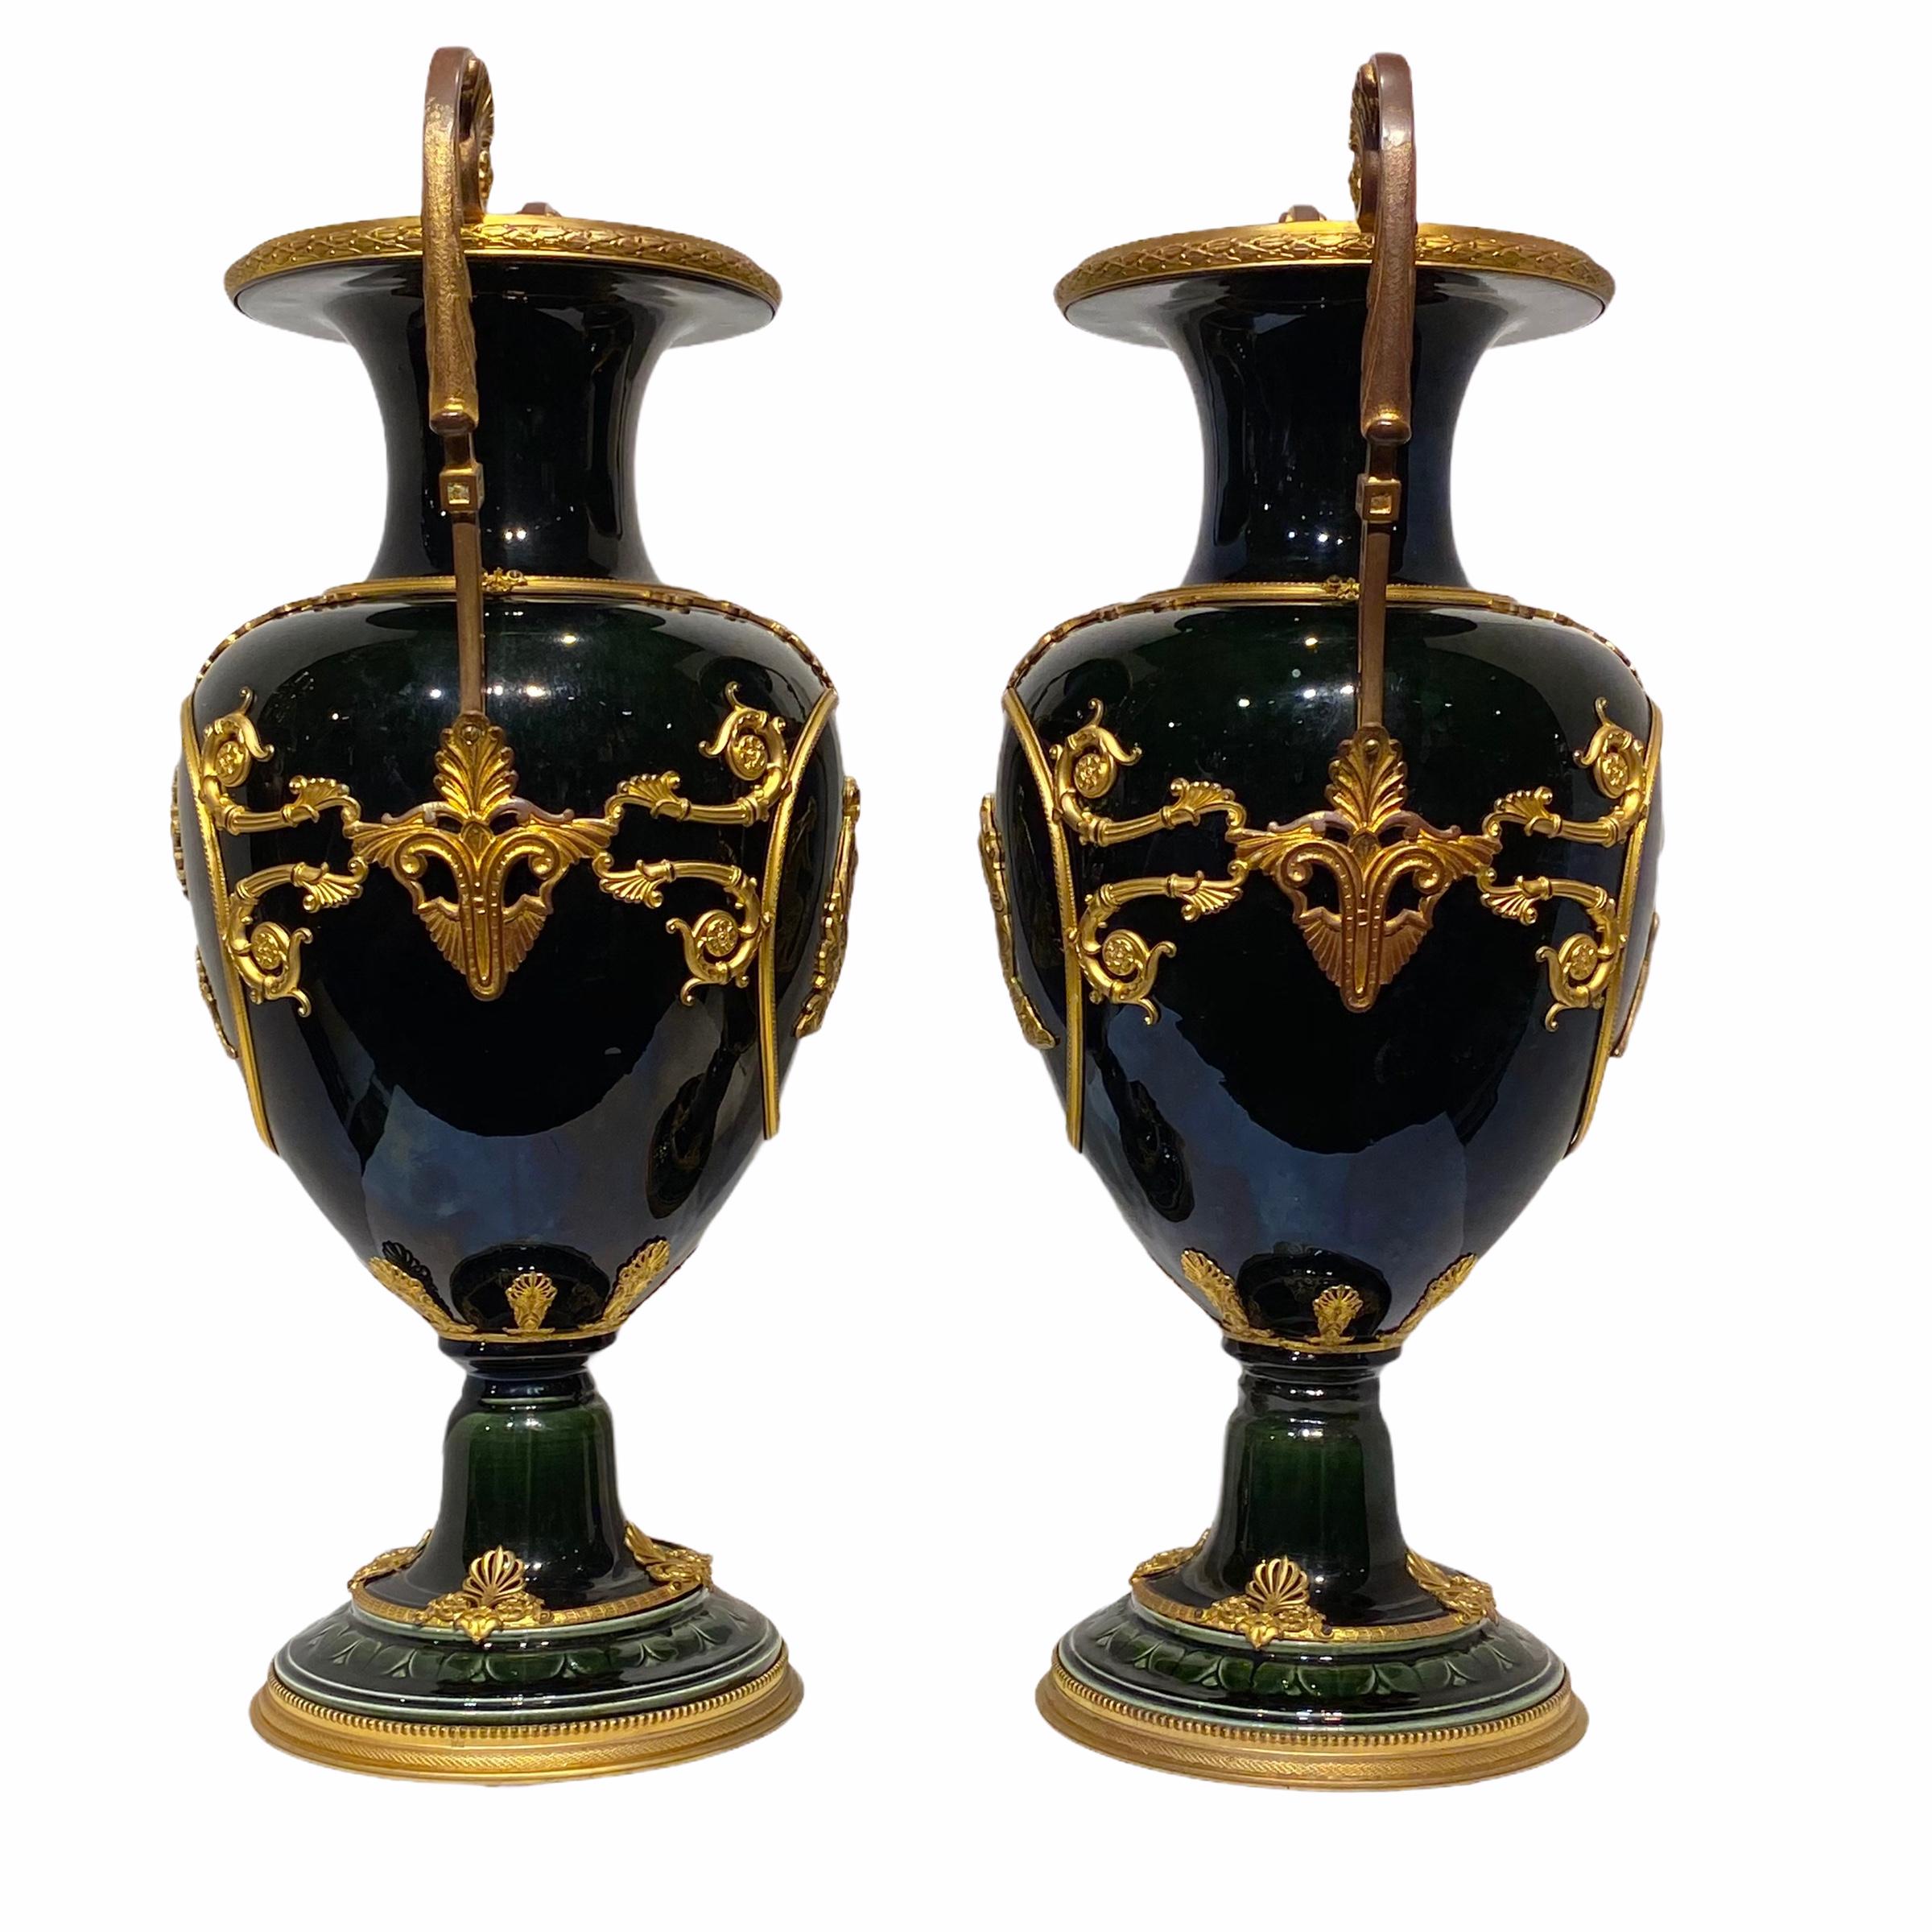 Iridescent Glazed Faience Vases with Neoclassical Gilt Bronze Mounts In Good Condition For Sale In New York, NY